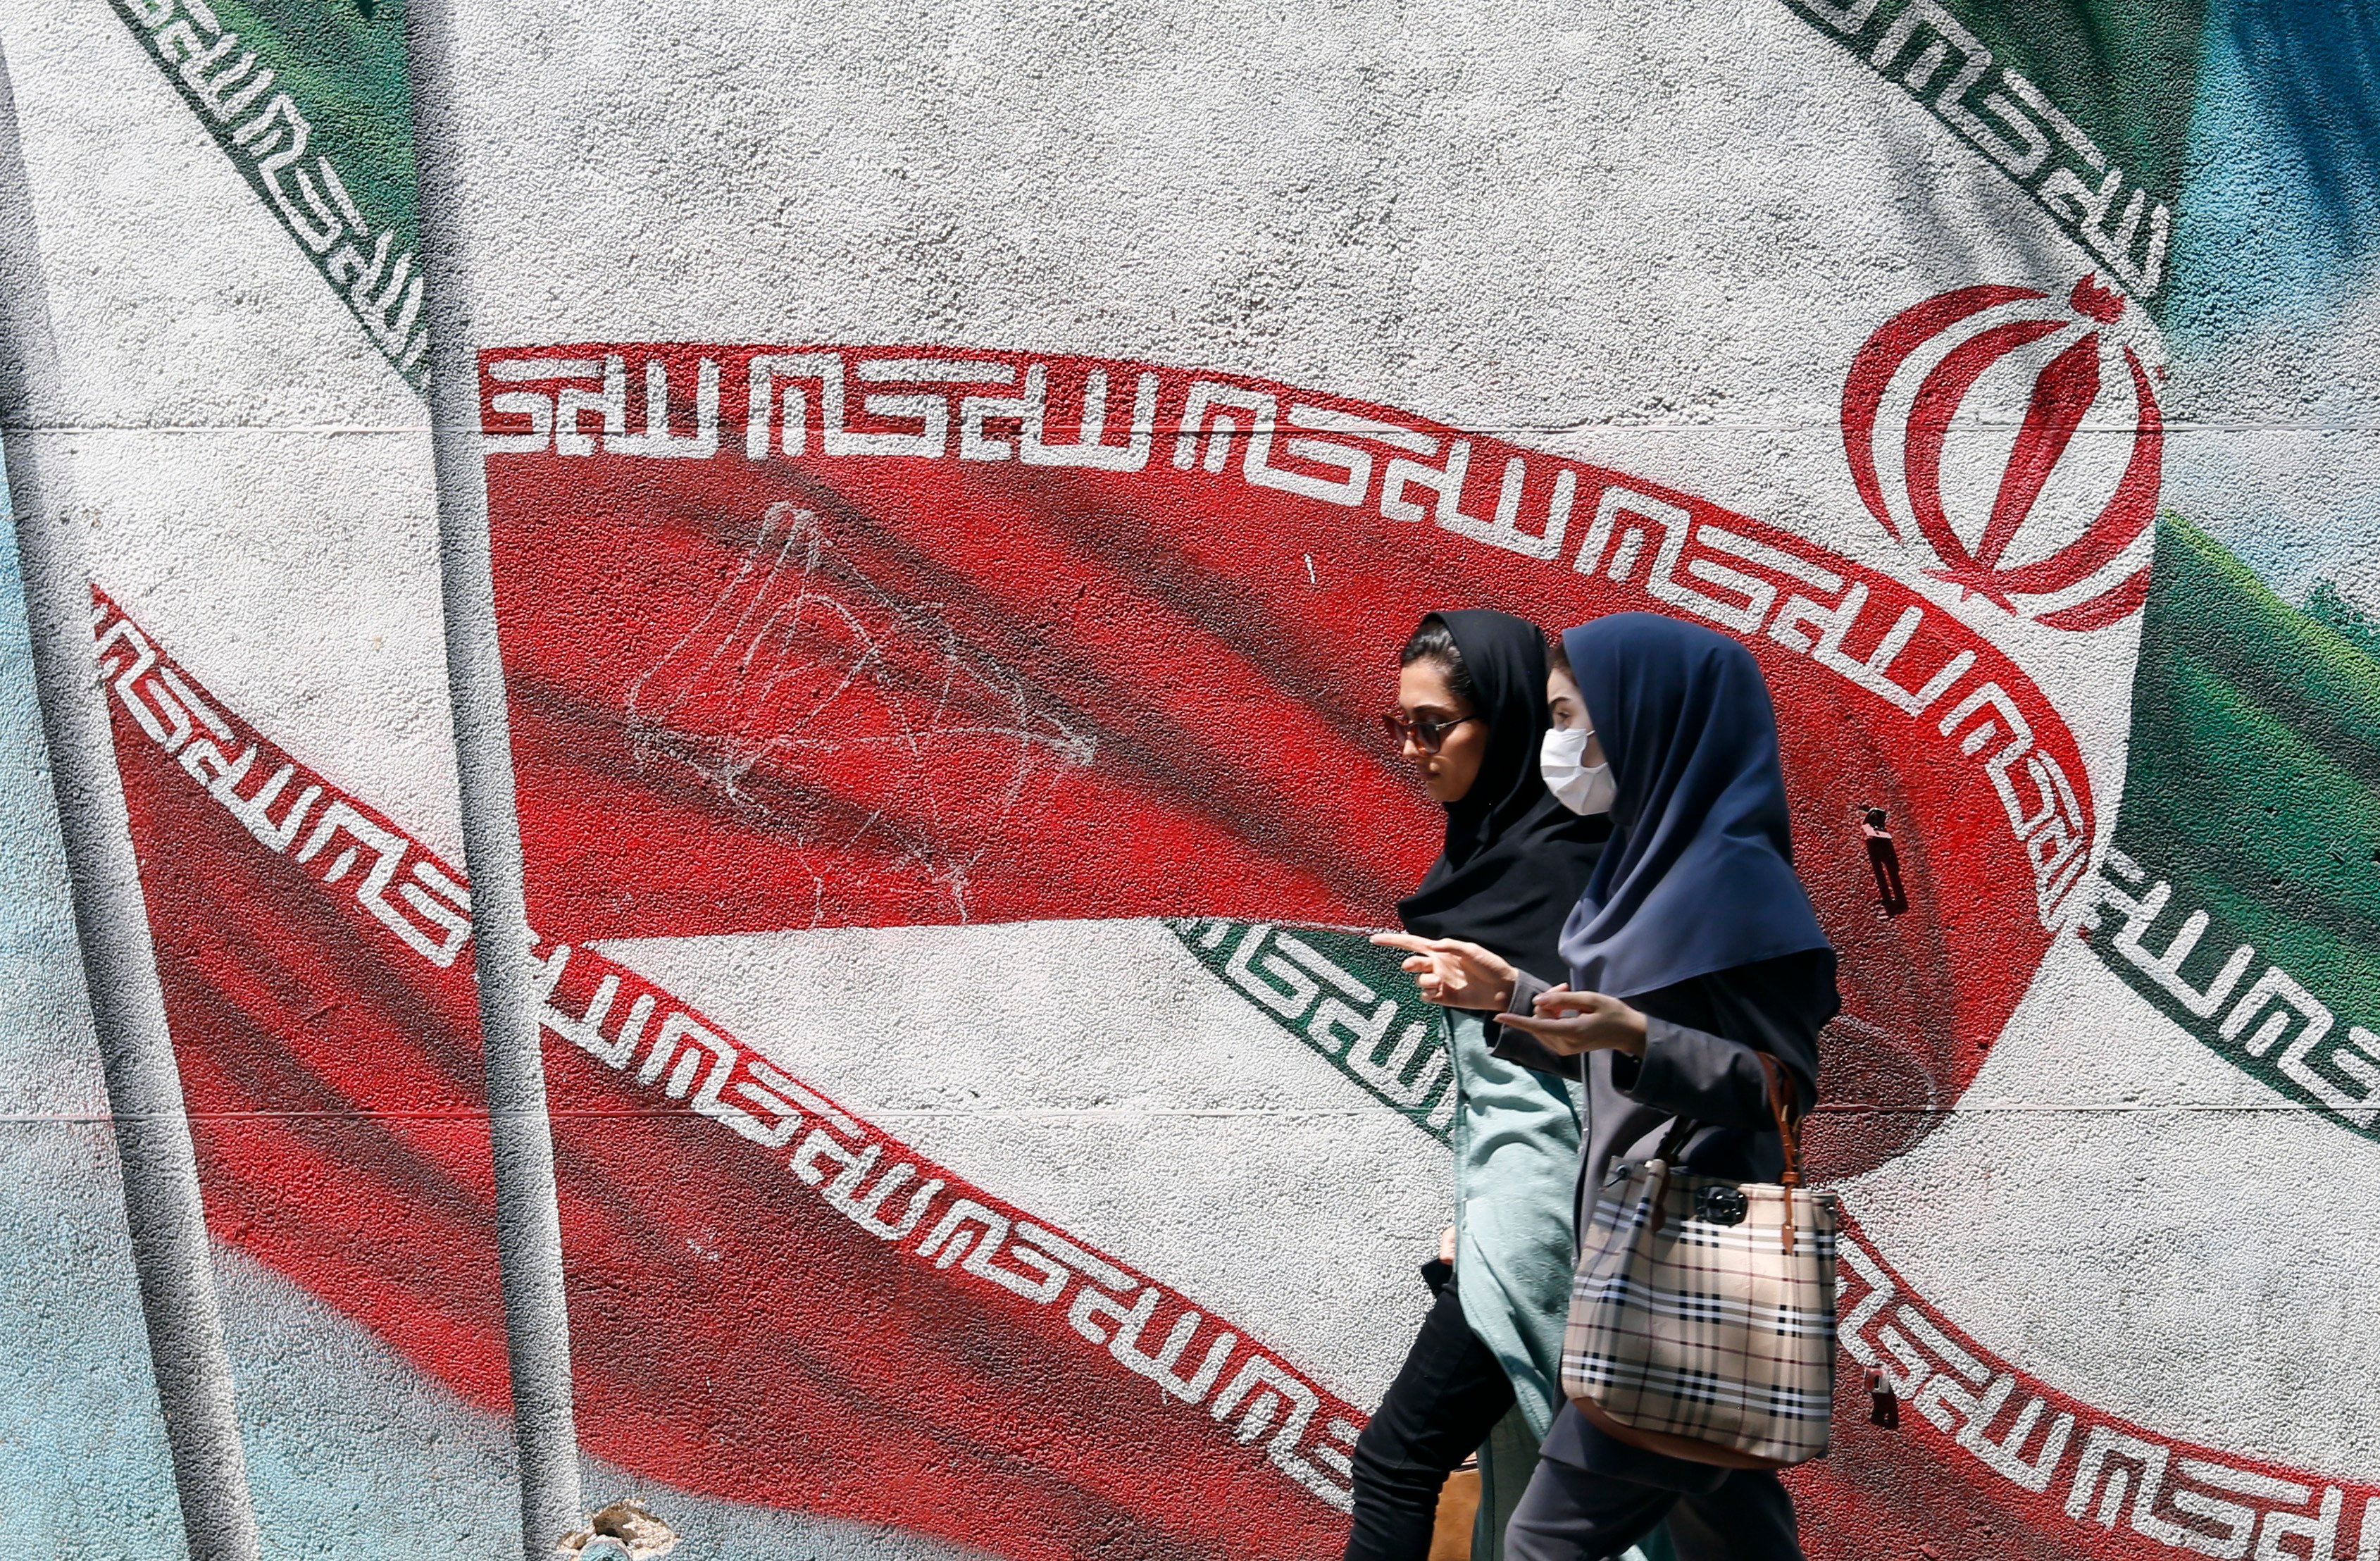 Young Iranians walk past a painting of Iran’s national flag in a street in Tehran. There are reports some schoolgirls are being poisoned to prevent them learning. File photo: EPA-EFE